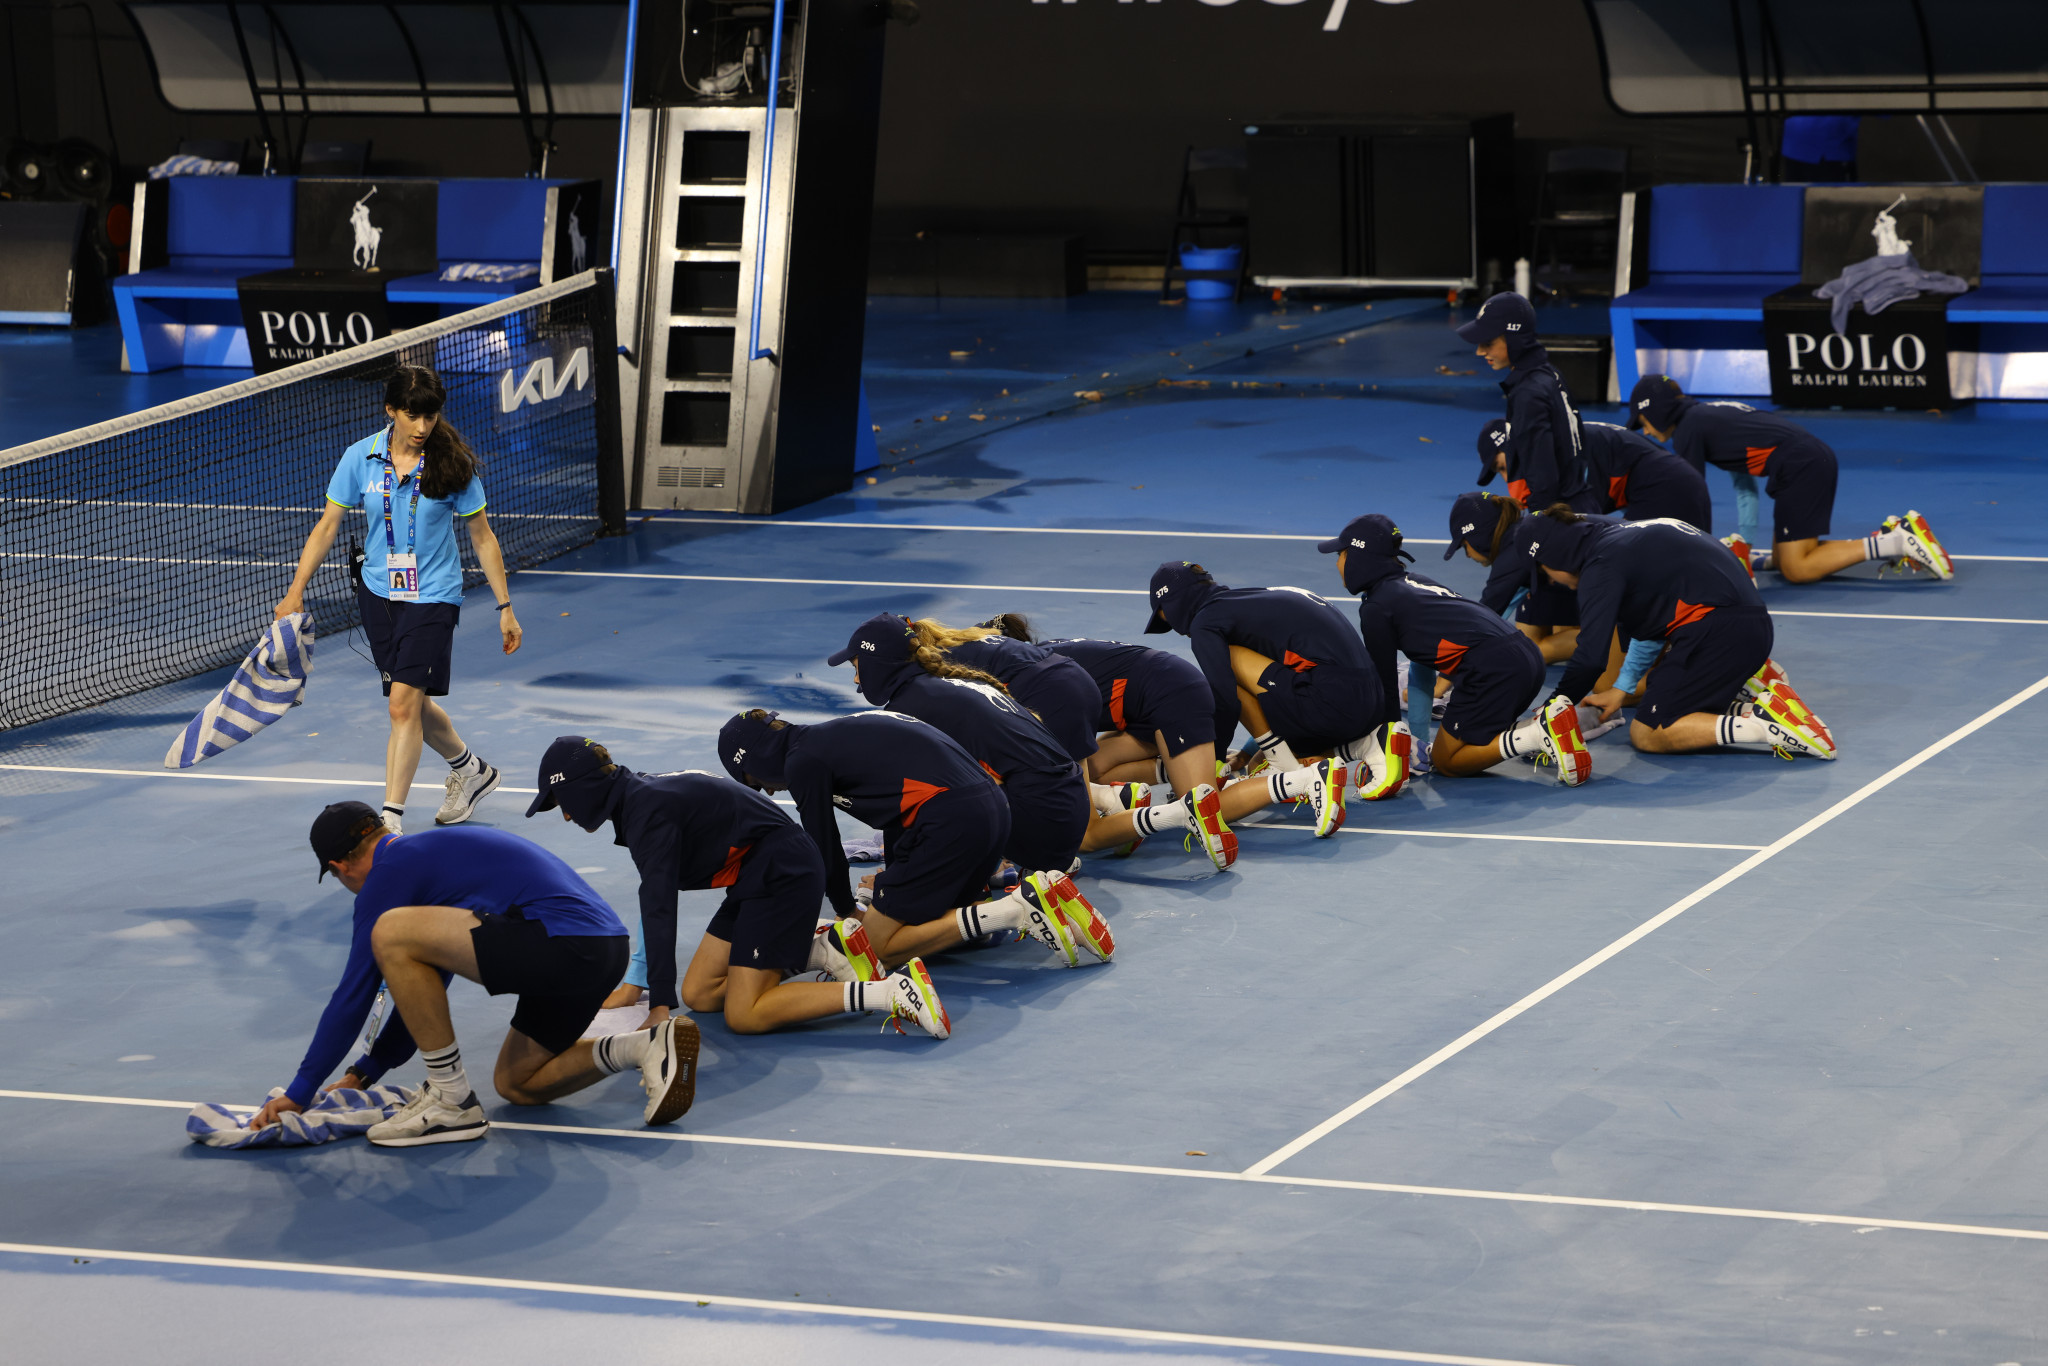 Ballkids use towels to wipe the courts following a heavy rain shower at Melbourne Park ©Getty Images